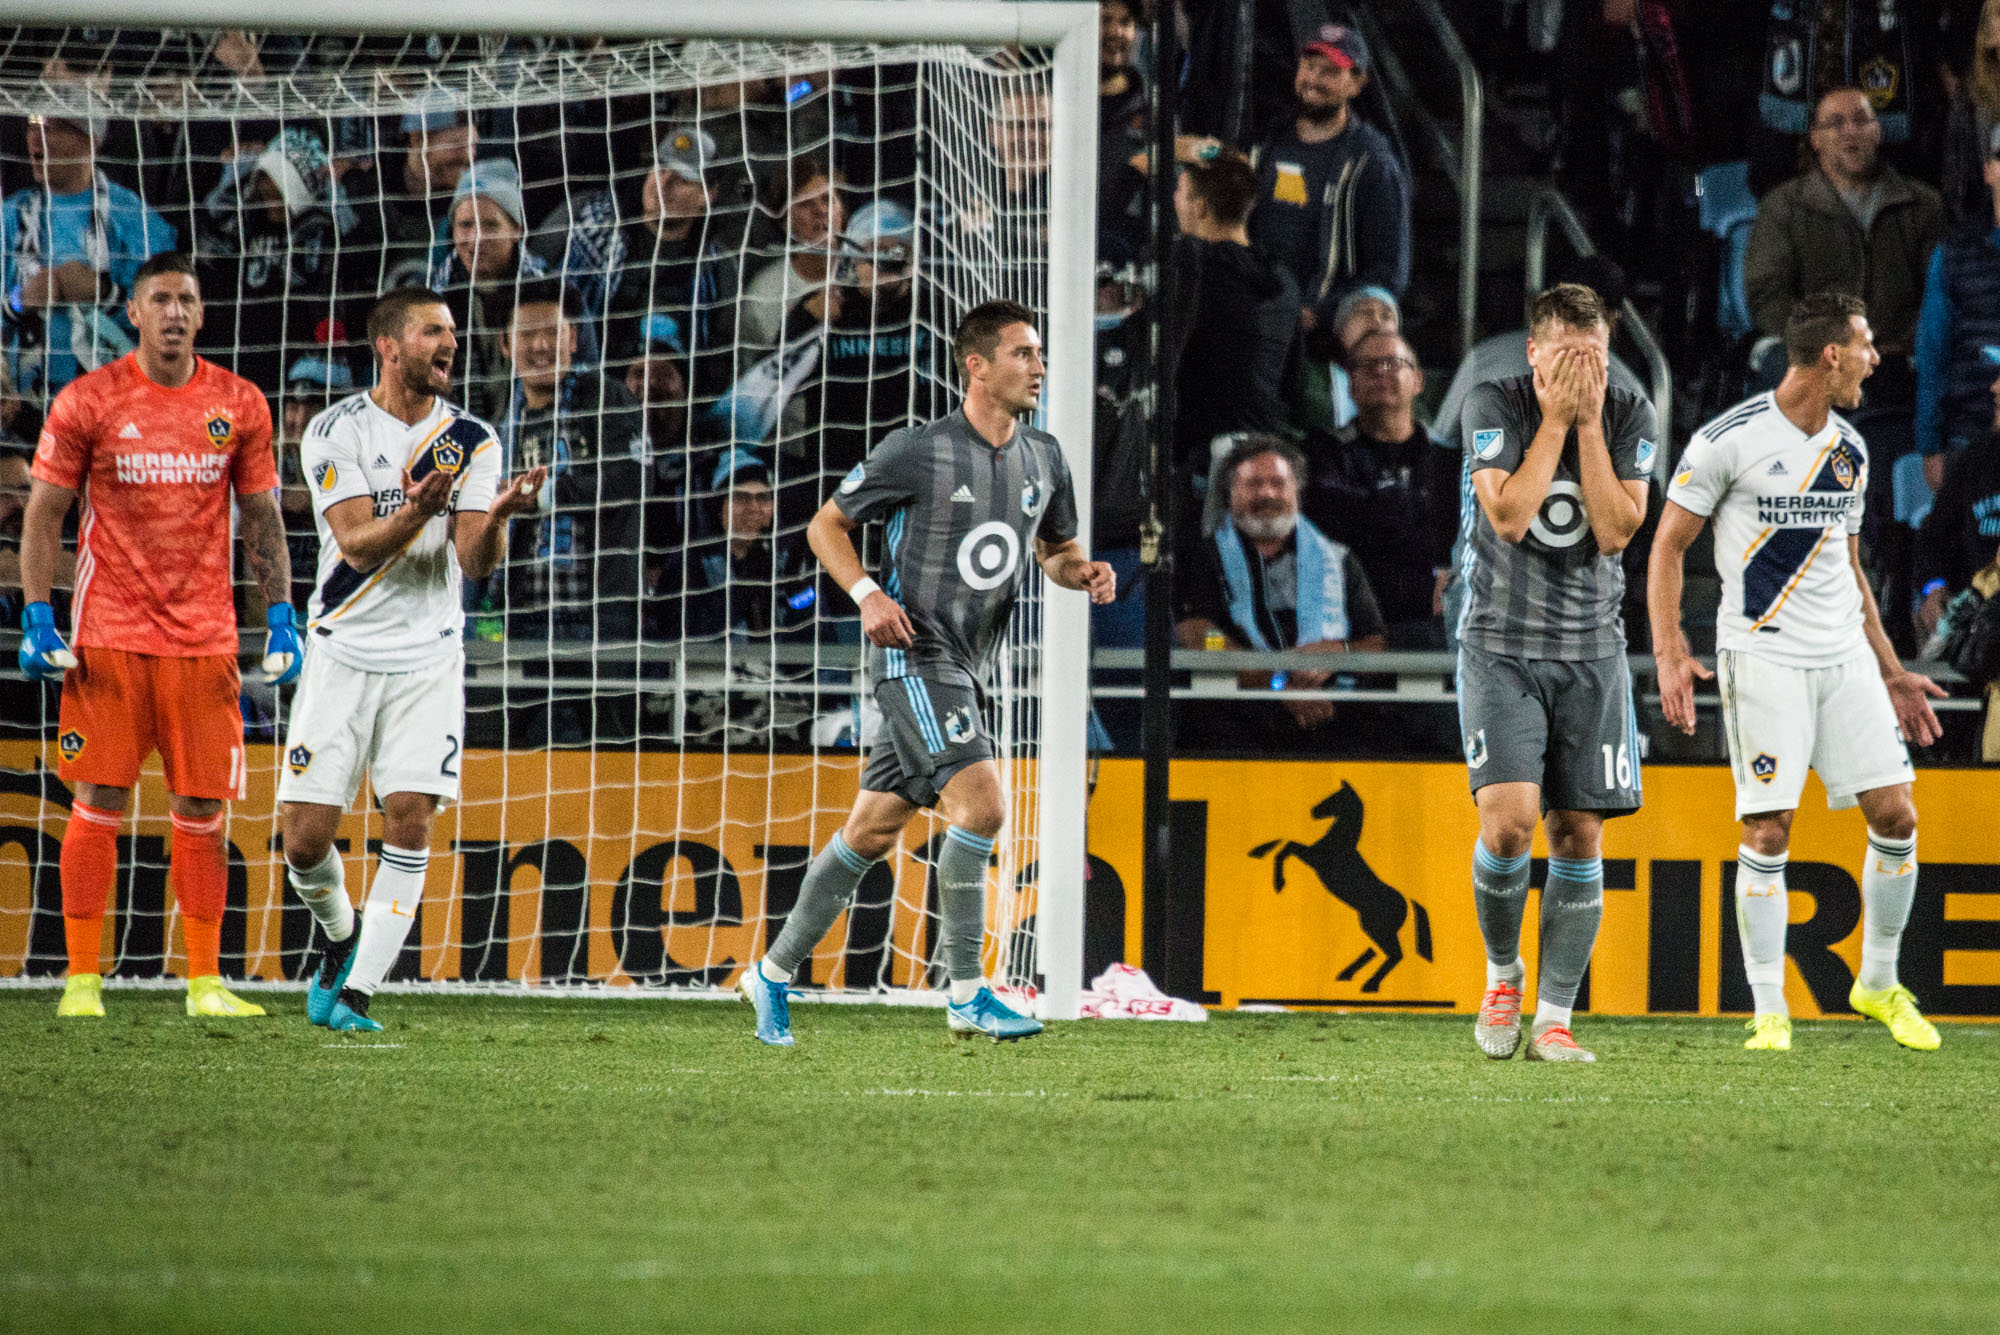 October 20, 2019 - Saint Paul, Minnesota, United States- Robin Lod shoes his disappointment after missing shot during an Audi MLS Cup Playoff match between Minnesota United and The Los Angeles Galaxy at Allianz Field (Photo: Tim C McLaughlin)